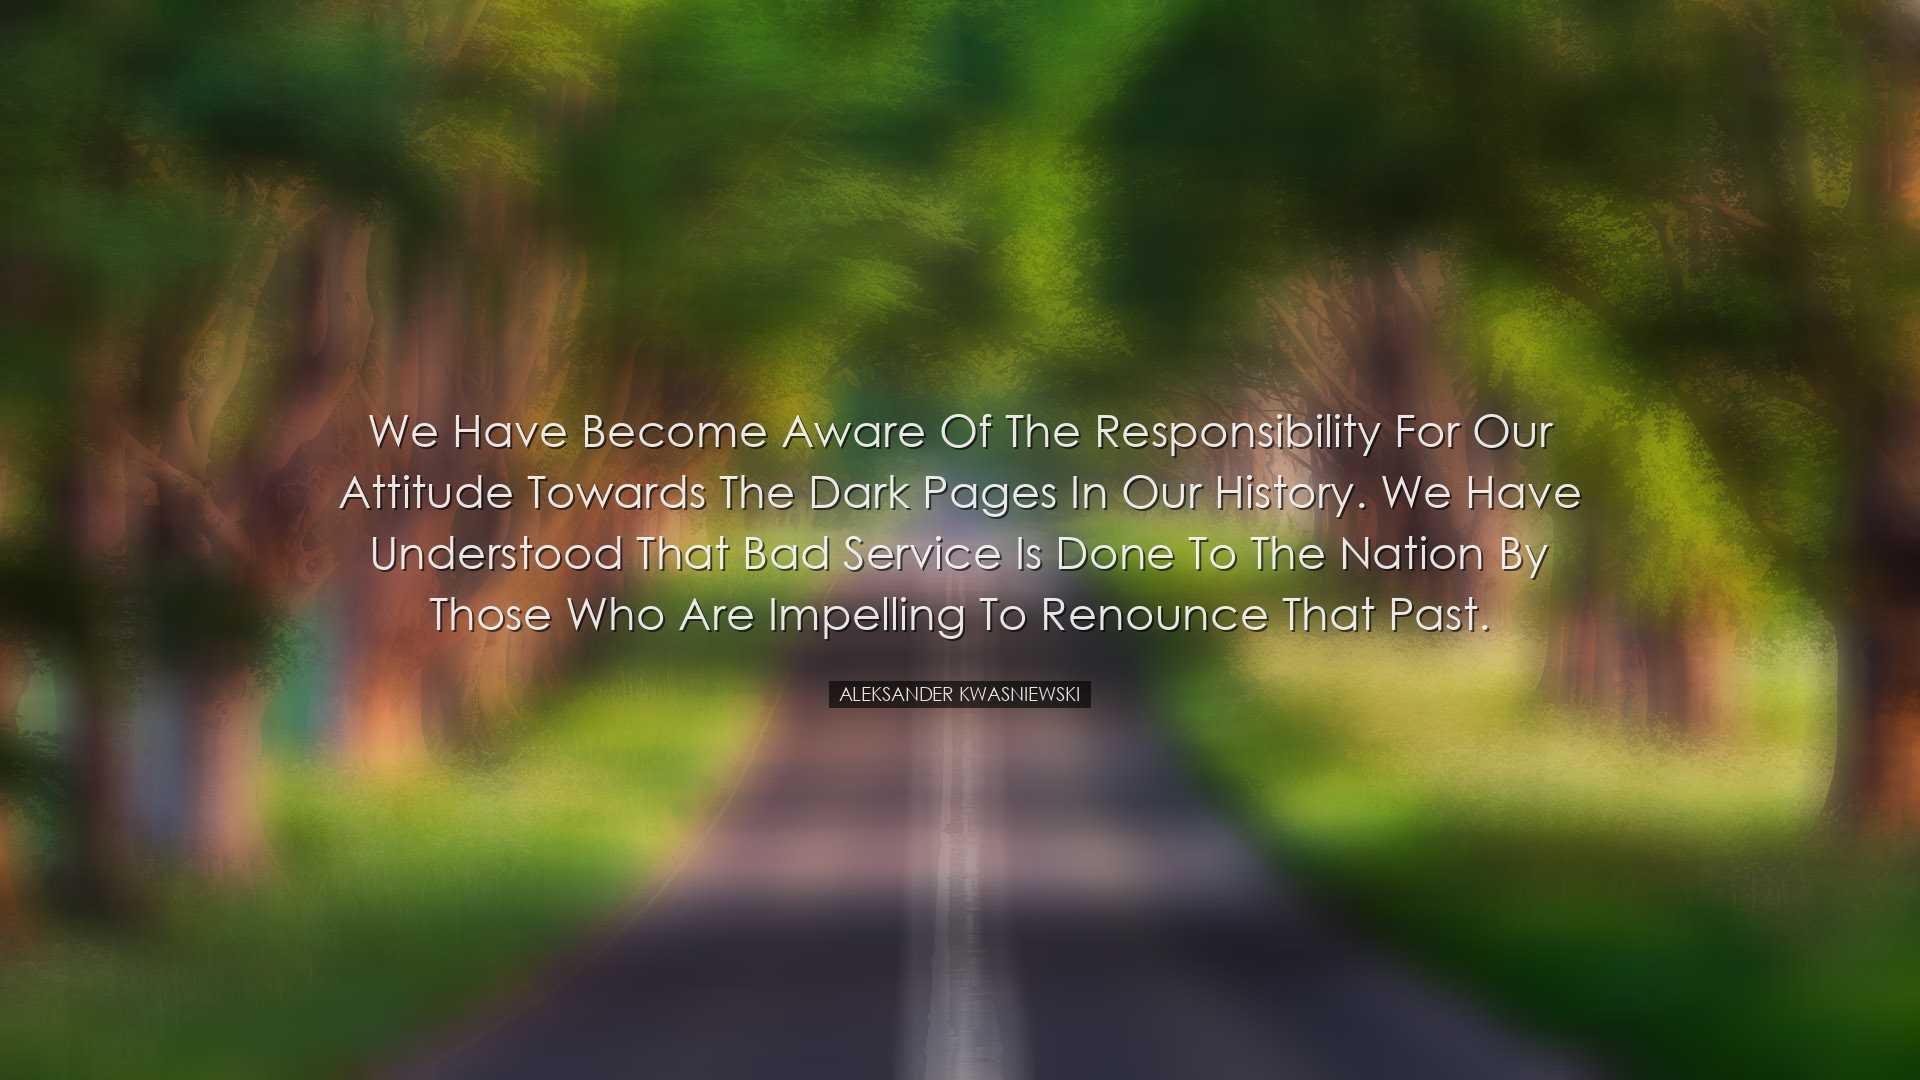 We have become aware of the responsibility for our attitude toward